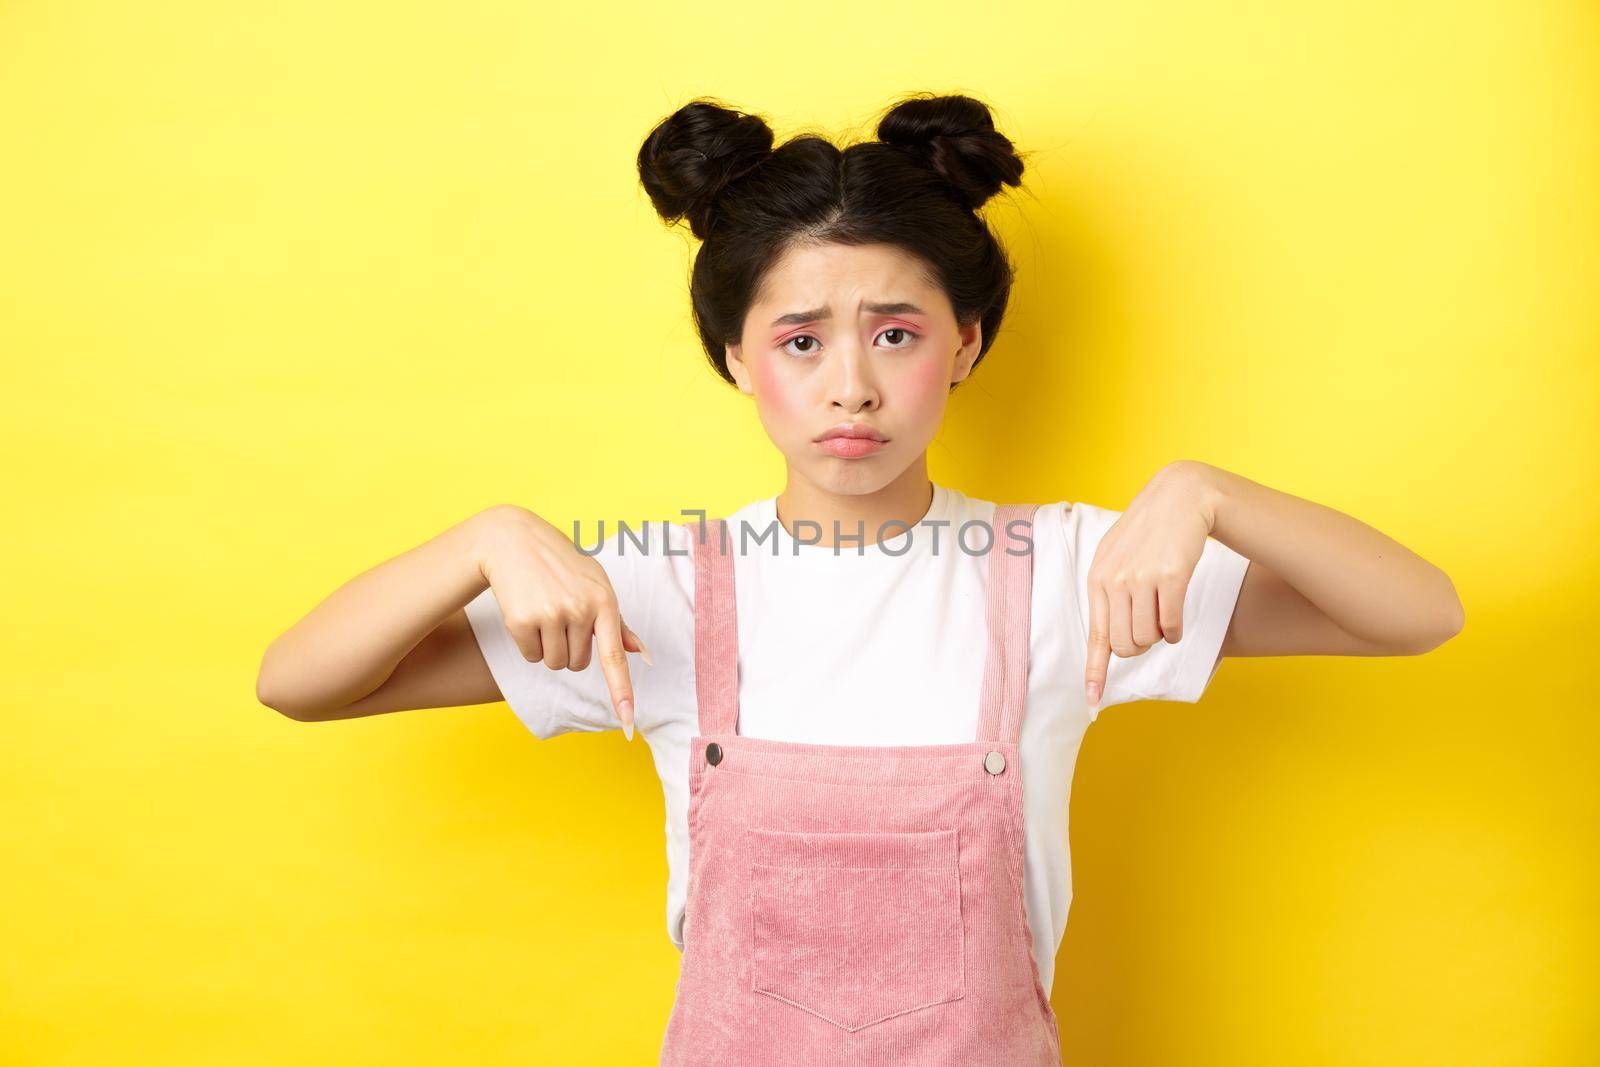 Sad frowning asian girl pointing fingers down at unfair thing, looking upset and gloomy, standing with makeup on yellow background.